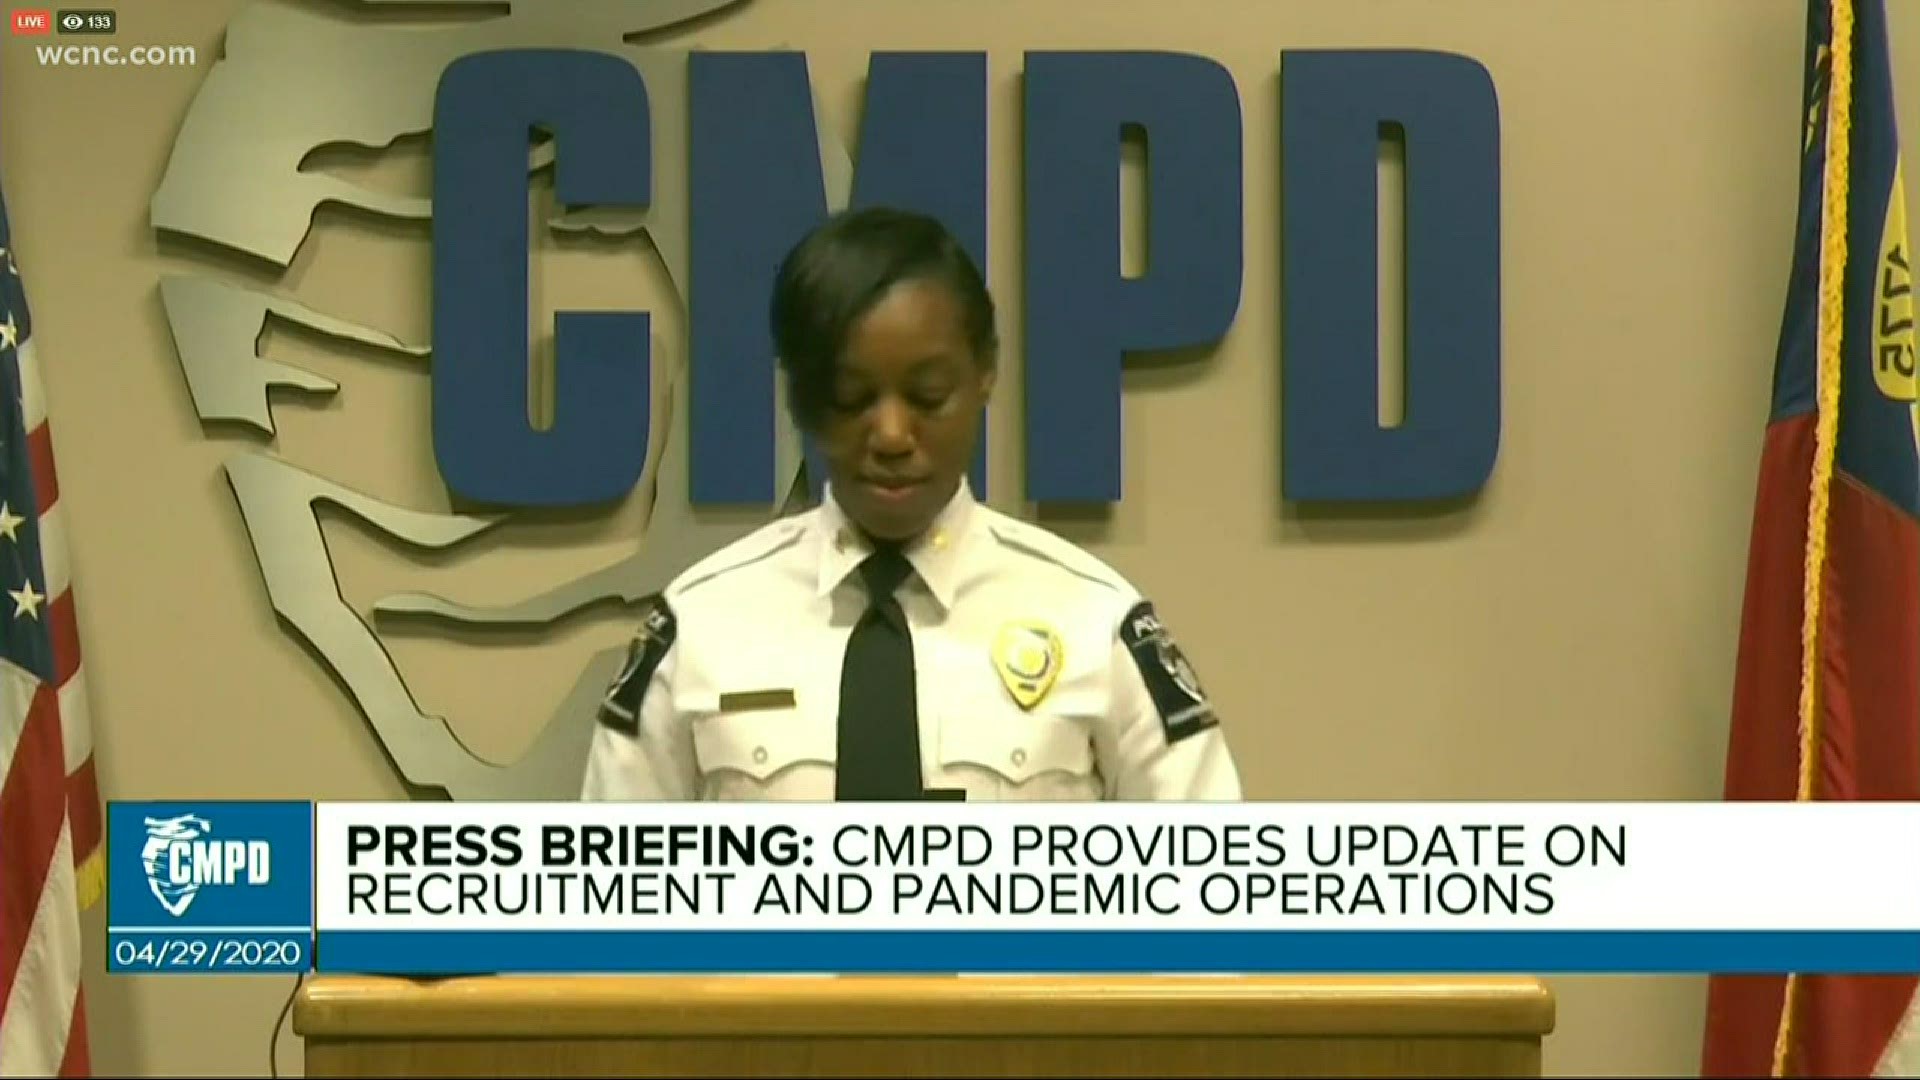 CMPD says they began recruitment last month and have already had 350 applicants.